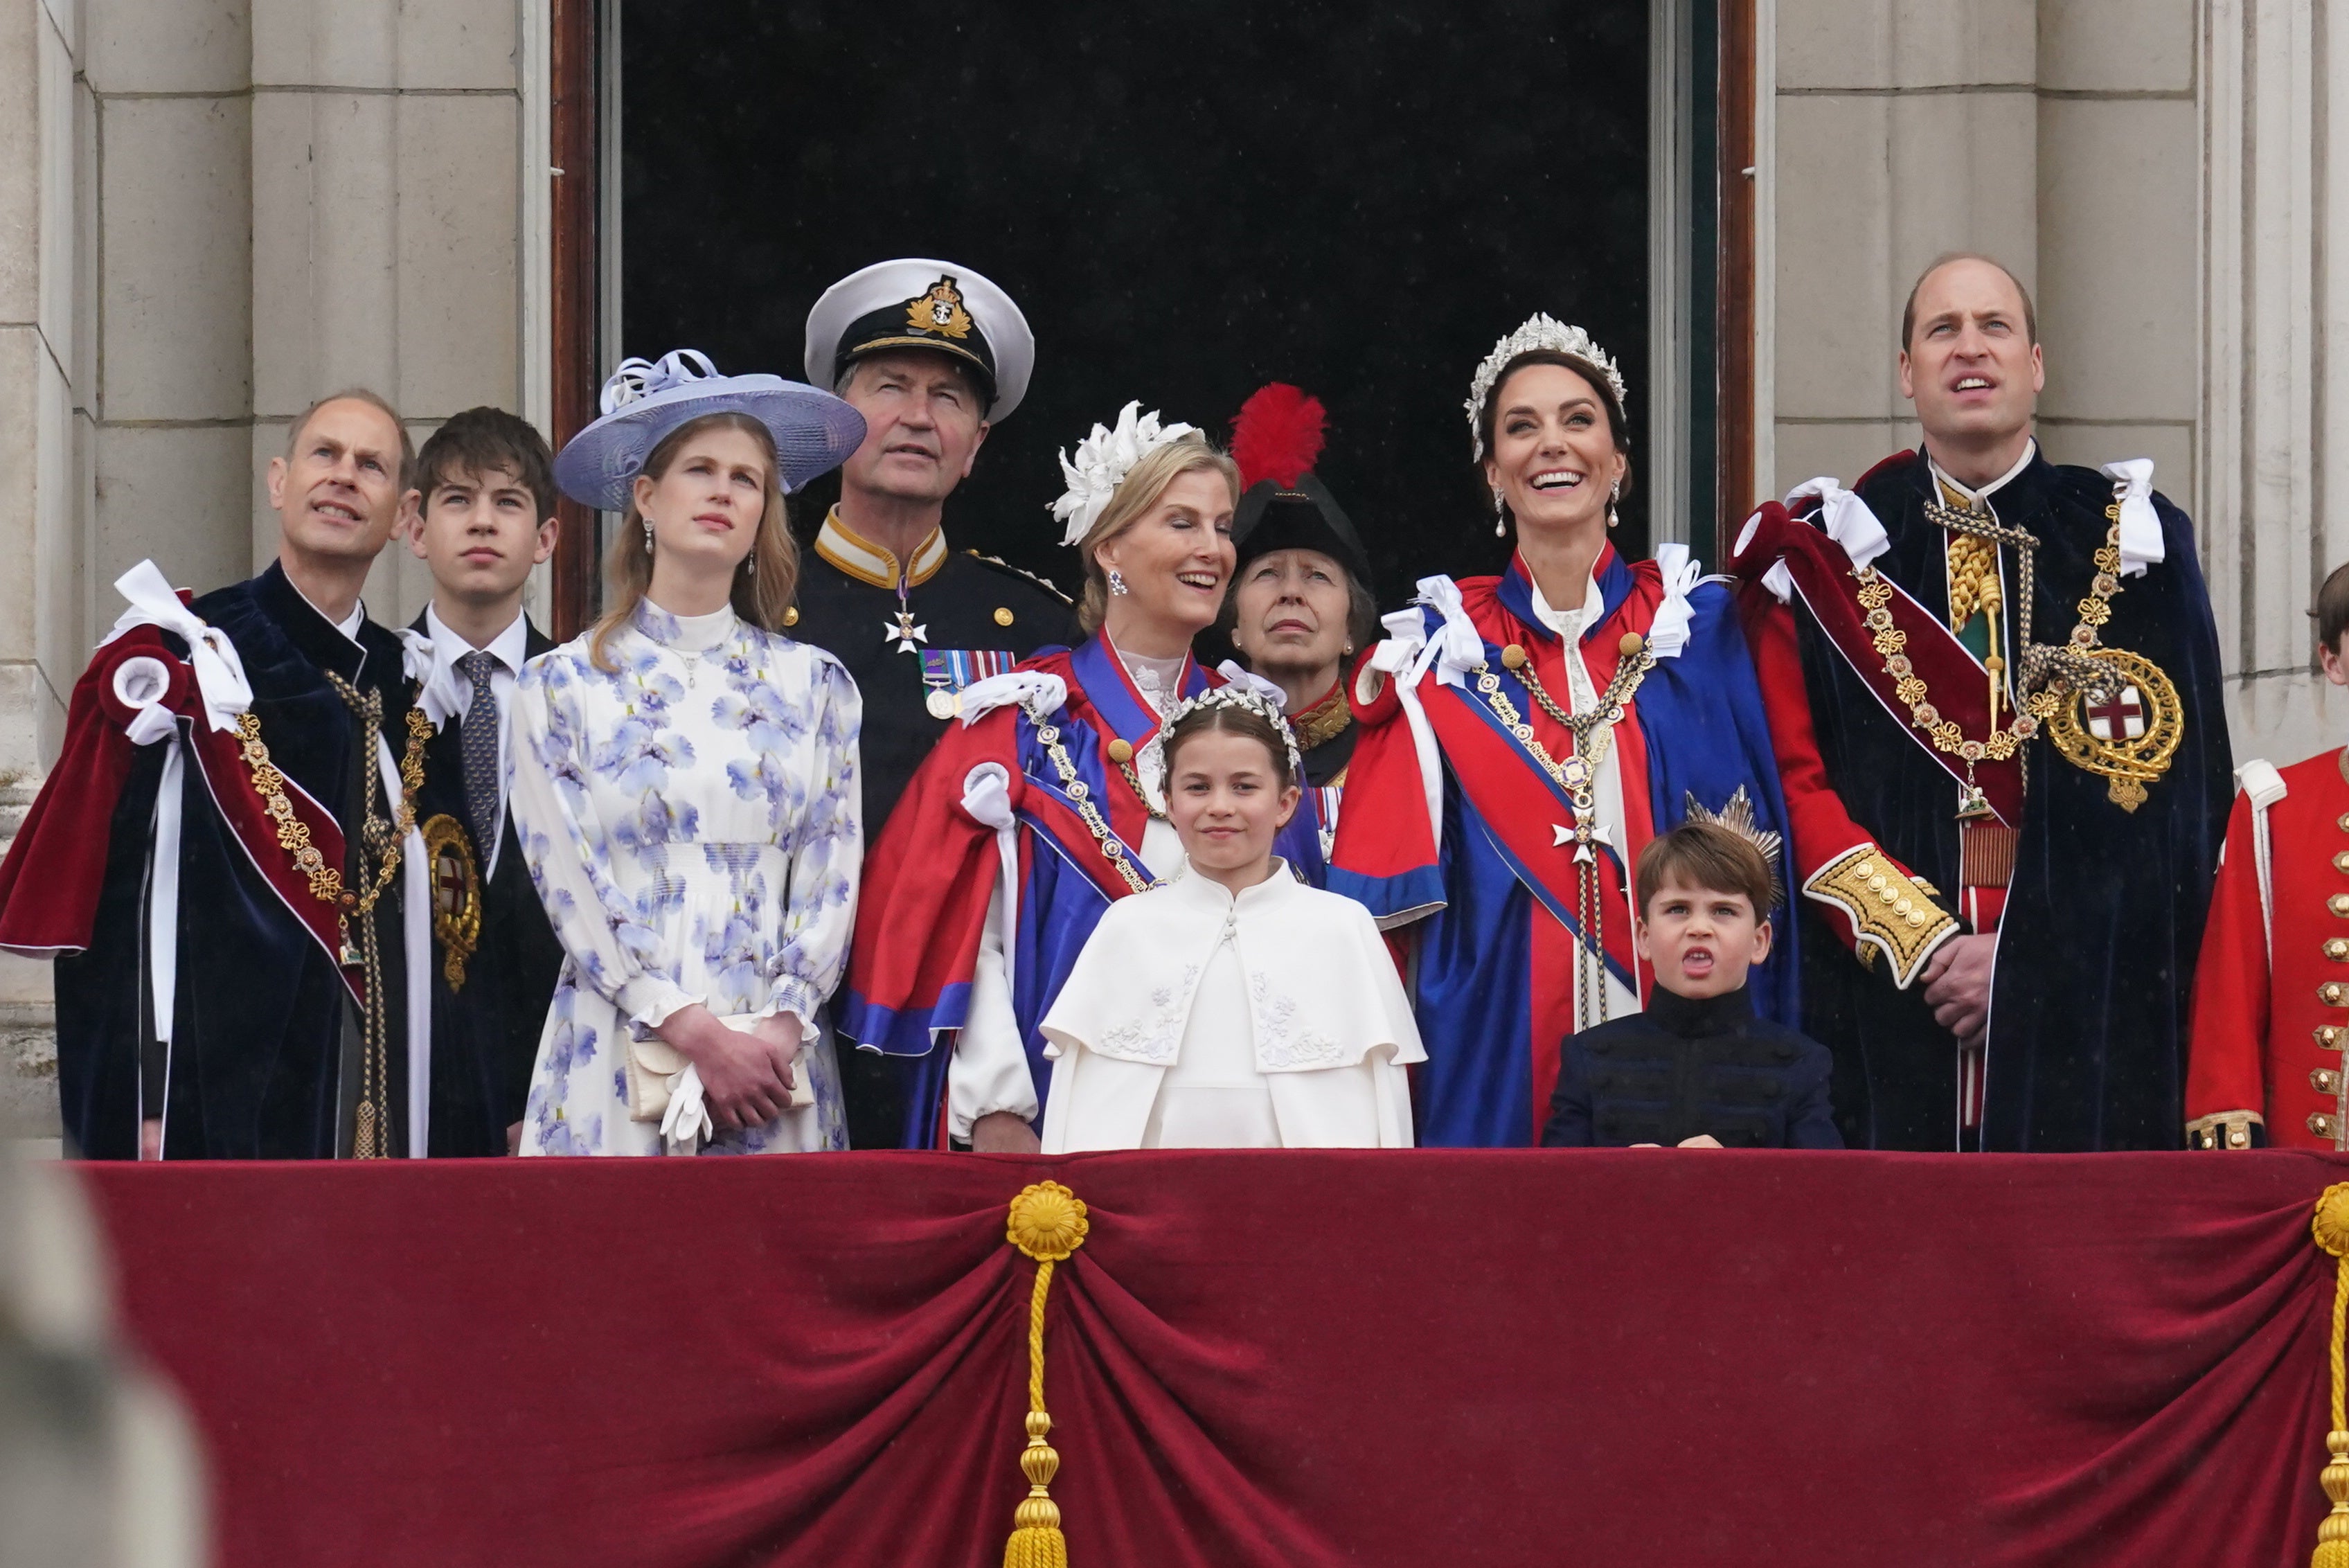 (Left to right) the Duke of Edinburgh, Earl of Wessex, Lady Louise Windsor, Vice Admiral Sir Tim Laurence, Duchess of Edinburgh, Princess Royal, Princess Charlotte, Princess of Wales, Prince Louis and Prince of Wales on the balcony of Buckingham Palace during the flypast